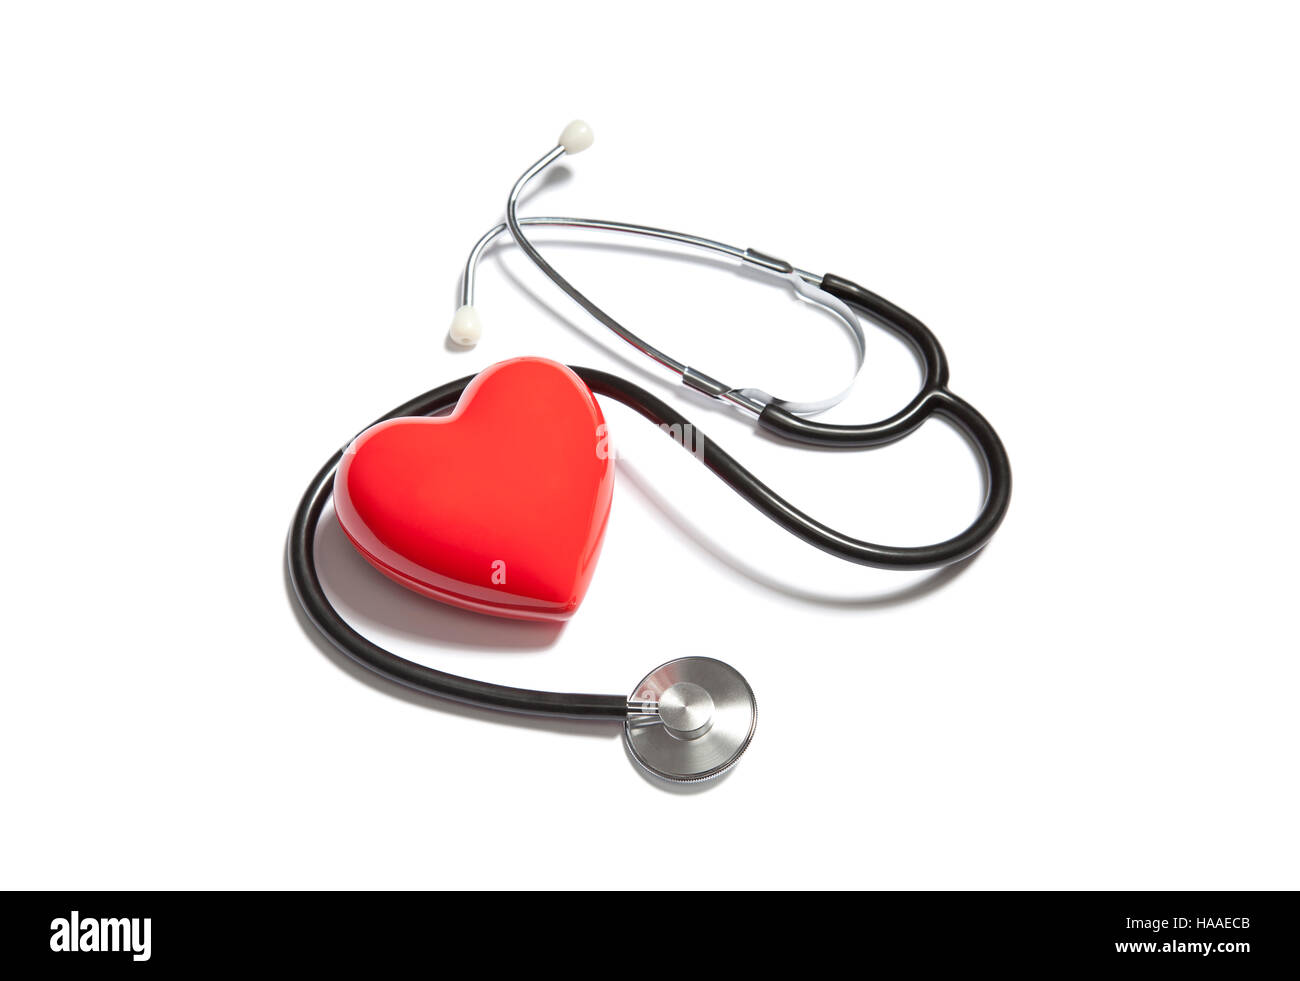 Medical stethoscope with red heart Stock Photo